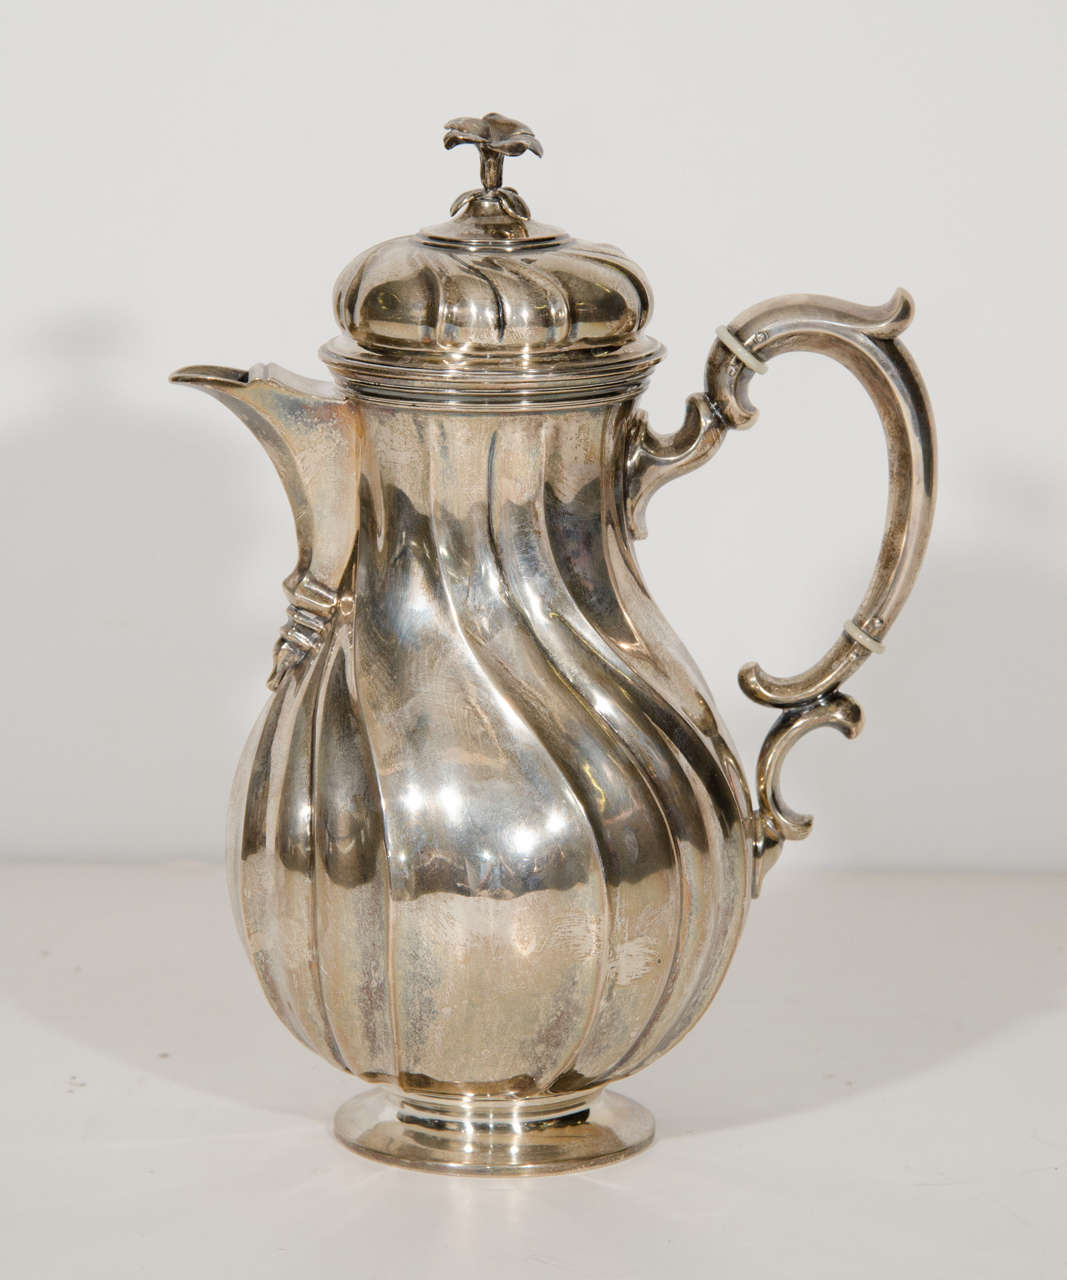 Early 20th Century silvered metal coffee pot. Provenance: Karl Lagerfeld.